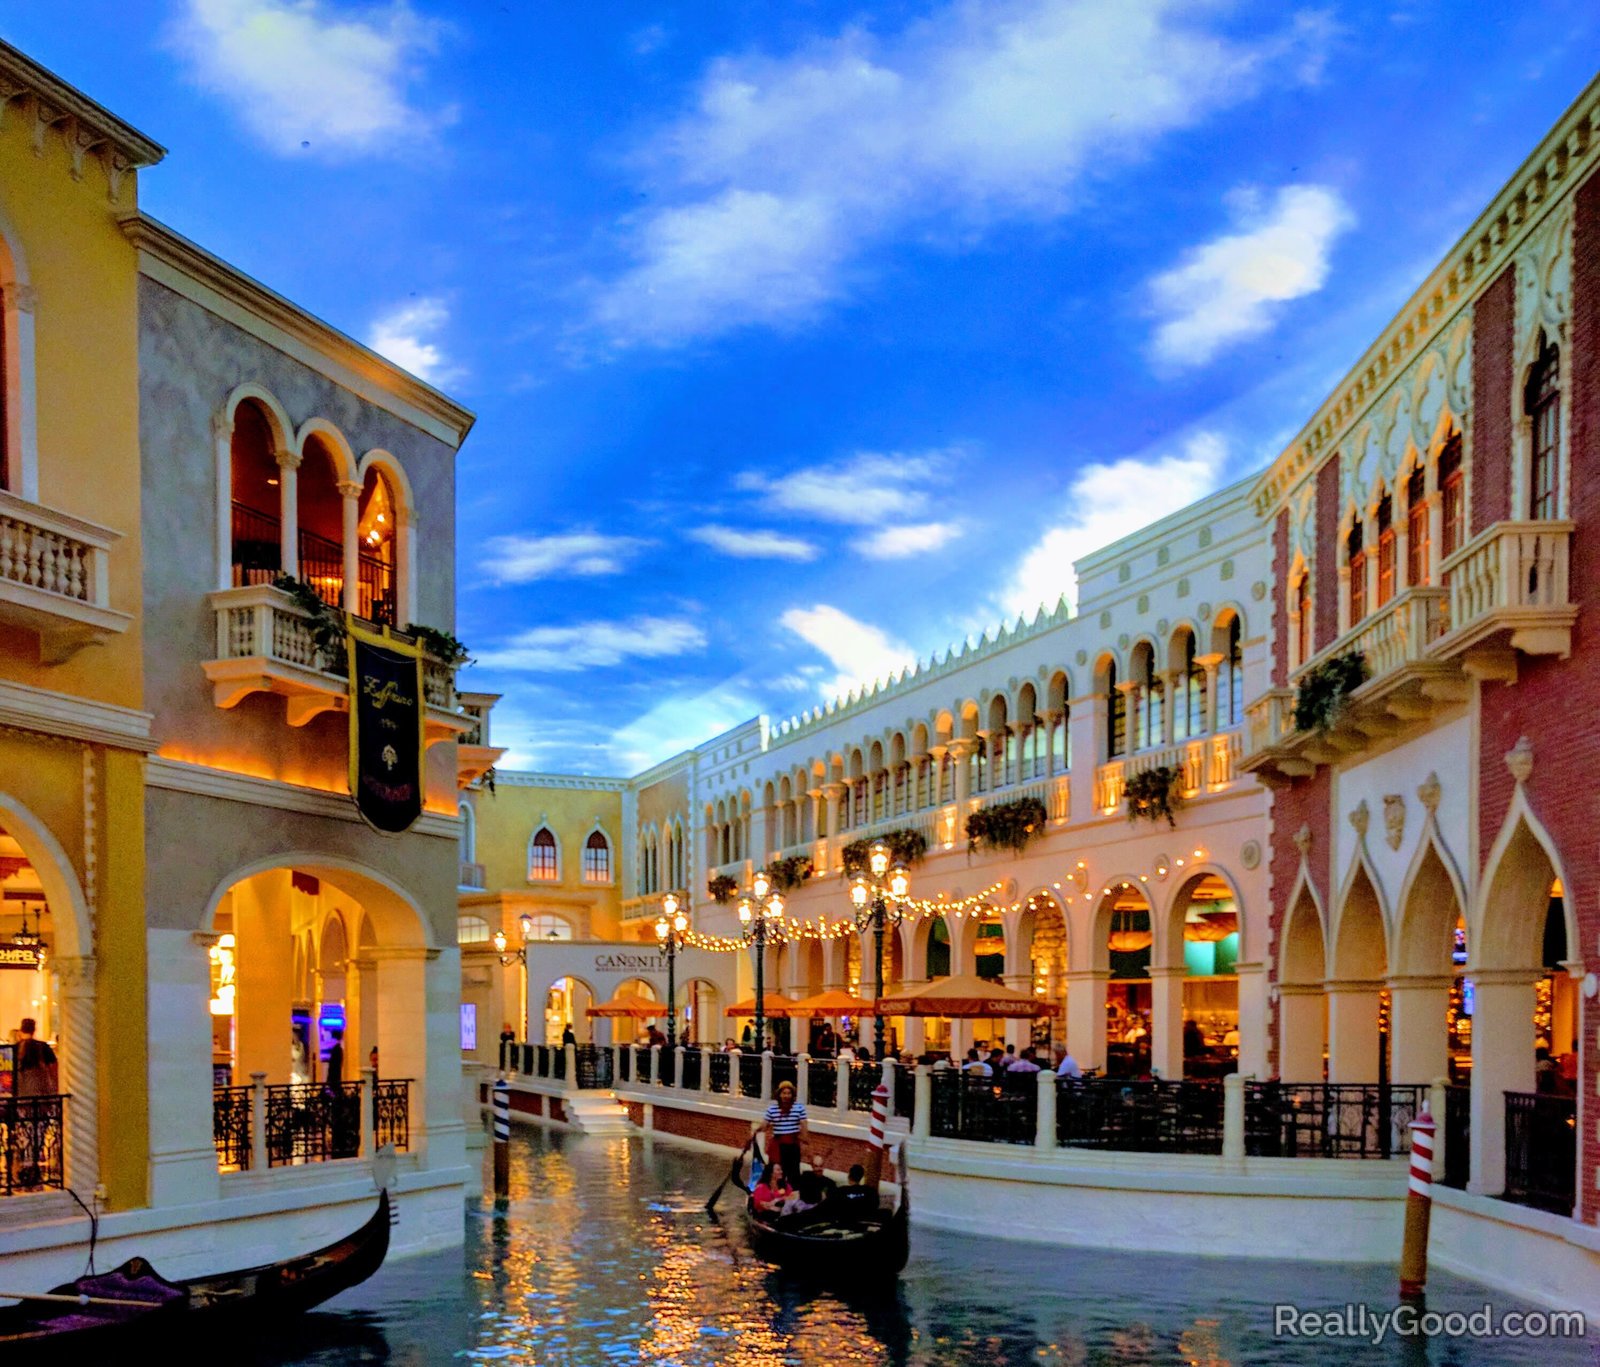 The Grand Canal Shoppes in Las Vegas